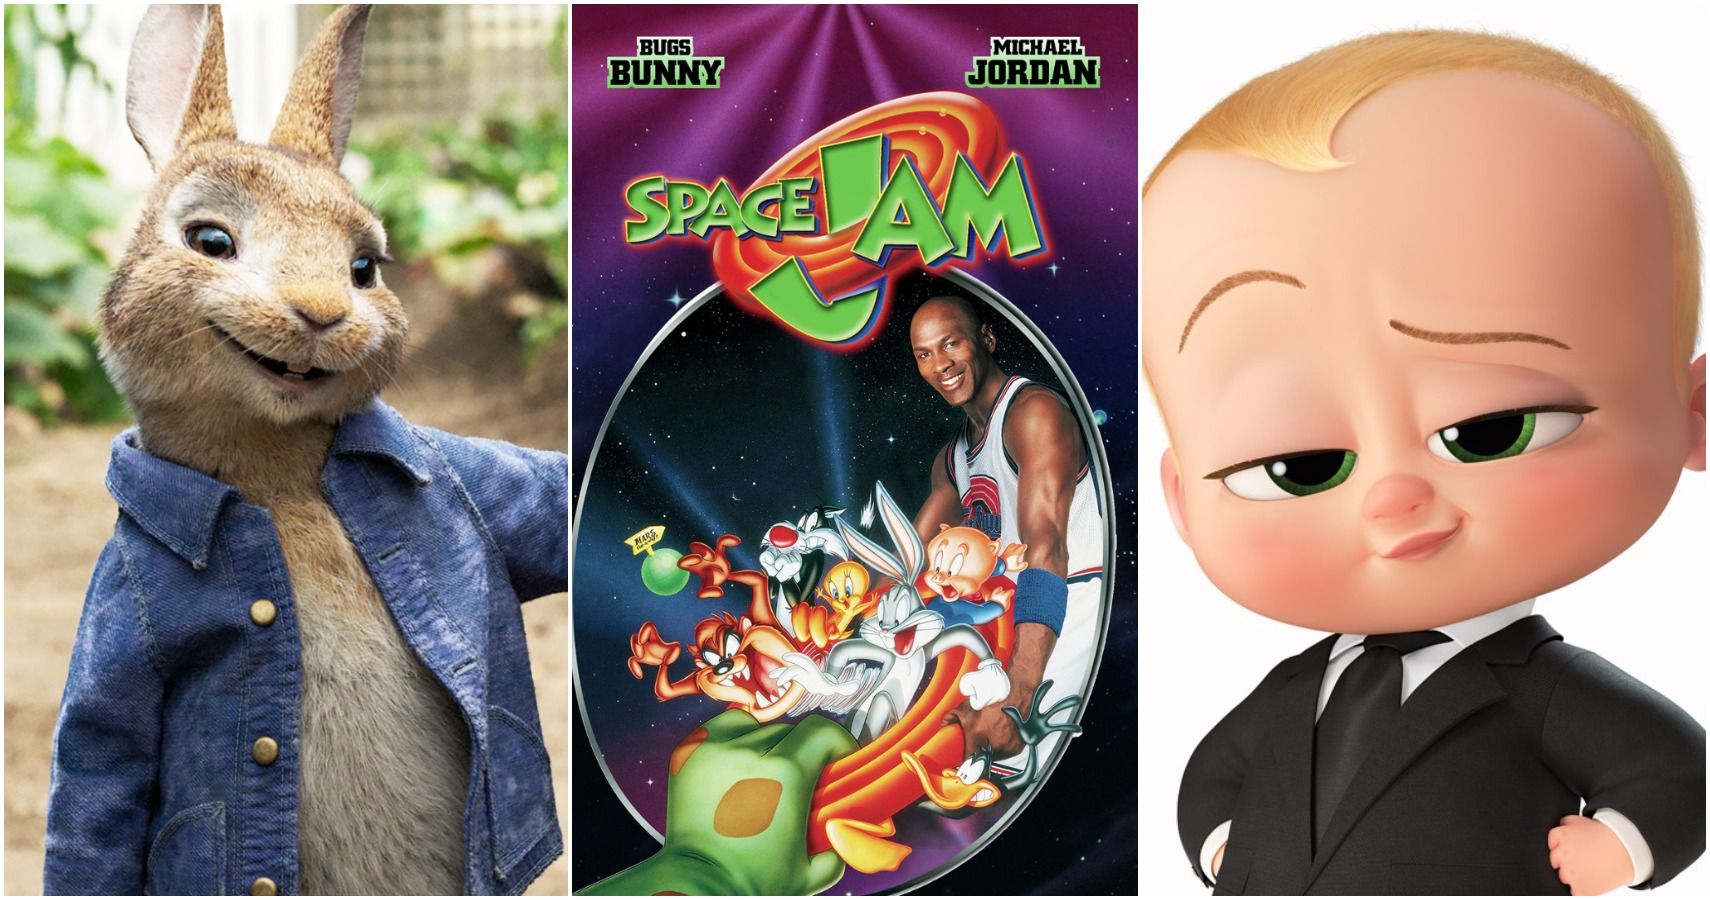 Space Jam A New Legacy And 9 Other Animated Movies To Look Forward To In 2021